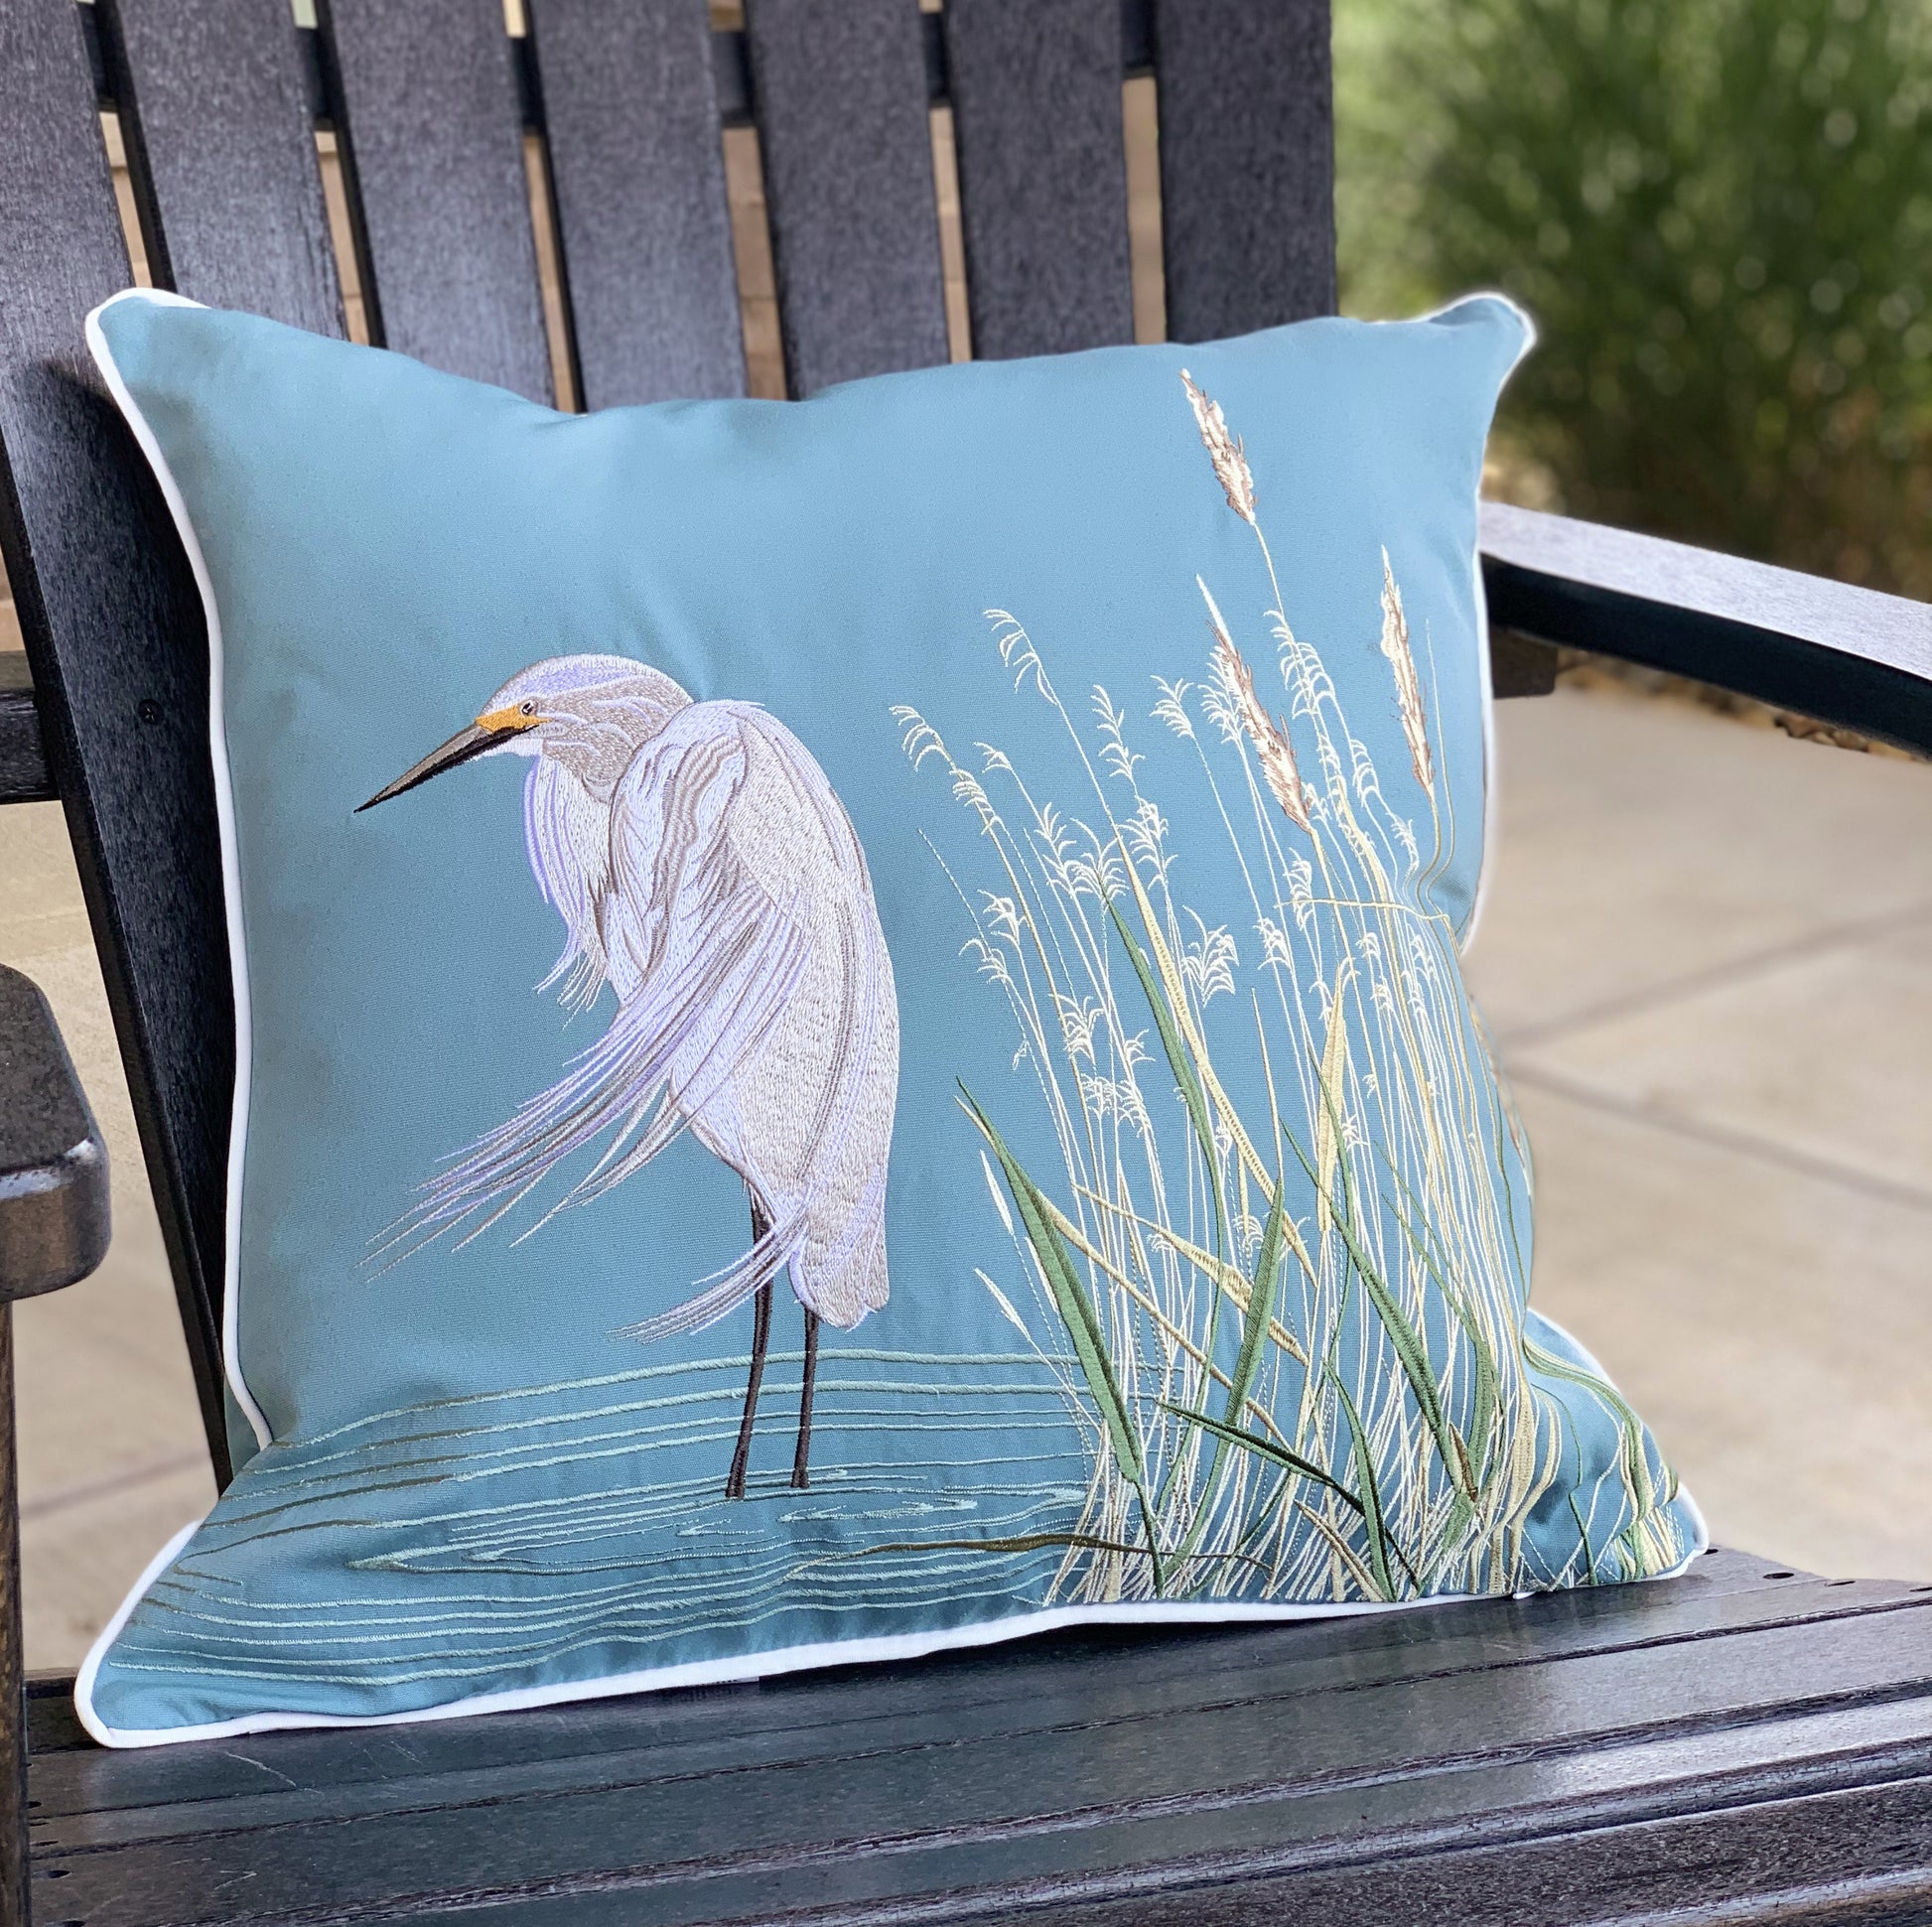 Snowy White Egret Indoor Outdoor Pillow styled on an Adirondack chair.